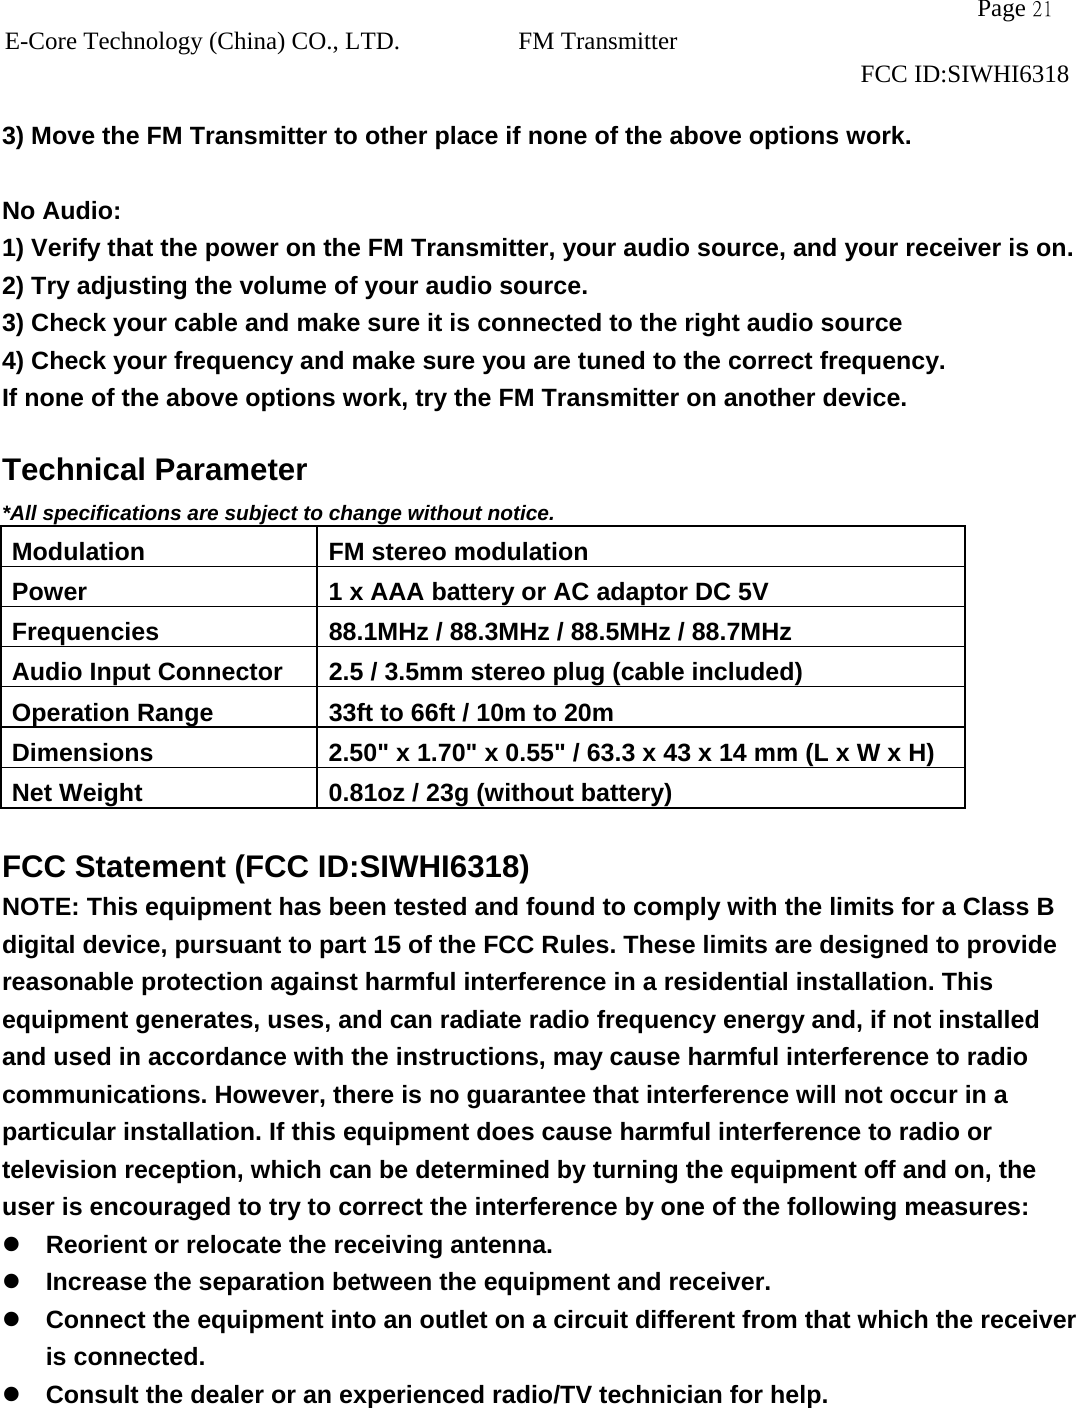                   Page 21E-Core Technology (China) CO., LTD. FM Transmitter                                                                     FCC ID:SIWHI6318  3) Move the FM Transmitter to other place if none of the above options work.  No Audio: 1) Verify that the power on the FM Transmitter, your audio source, and your receiver is on. 2) Try adjusting the volume of your audio source. 3) Check your cable and make sure it is connected to the right audio source   4) Check your frequency and make sure you are tuned to the correct frequency. If none of the above options work, try the FM Transmitter on another device.  Technical Parameter *All specifications are subject to change without notice. Modulation  FM stereo modulation Power  1 x AAA battery or AC adaptor DC 5V Frequencies  88.1MHz / 88.3MHz / 88.5MHz / 88.7MHz   Audio Input Connector  2.5 / 3.5mm stereo plug (cable included) Operation Range  33ft to 66ft / 10m to 20m Dimensions  2.50&quot; x 1.70&quot; x 0.55&quot; / 63.3 x 43 x 14 mm (L x W x H) Net Weight  0.81oz / 23g (without battery)  FCC Statement (FCC ID:SIWHI6318) NOTE: This equipment has been tested and found to comply with the limits for a Class B digital device, pursuant to part 15 of the FCC Rules. These limits are designed to provide reasonable protection against harmful interference in a residential installation. This equipment generates, uses, and can radiate radio frequency energy and, if not installed and used in accordance with the instructions, may cause harmful interference to radio communications. However, there is no guarantee that interference will not occur in a particular installation. If this equipment does cause harmful interference to radio or television reception, which can be determined by turning the equipment off and on, the user is encouraged to try to correct the interference by one of the following measures:  Reorient or relocate the receiving antenna.  Increase the separation between the equipment and receiver.  Connect the equipment into an outlet on a circuit different from that which the receiver is connected.  Consult the dealer or an experienced radio/TV technician for help.  